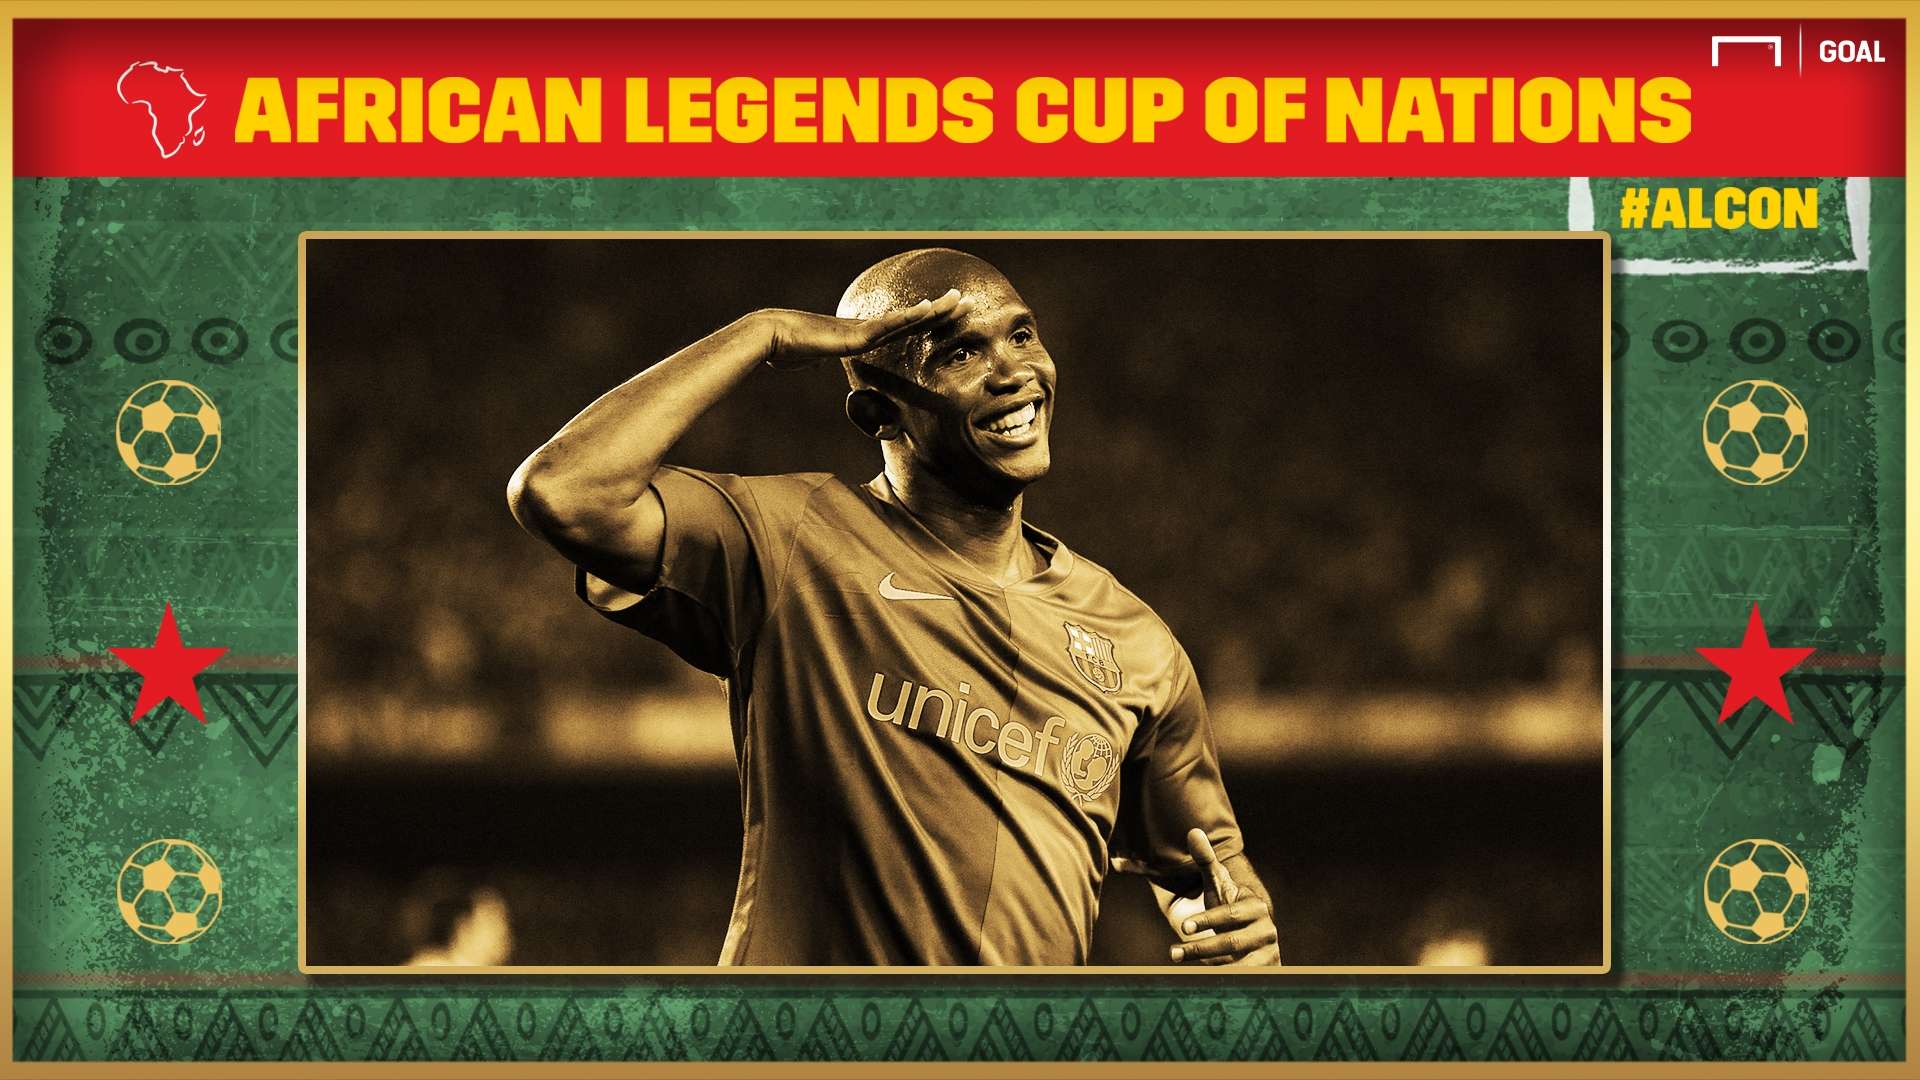 African Legends Cup of Nations: Samuel Eto'o